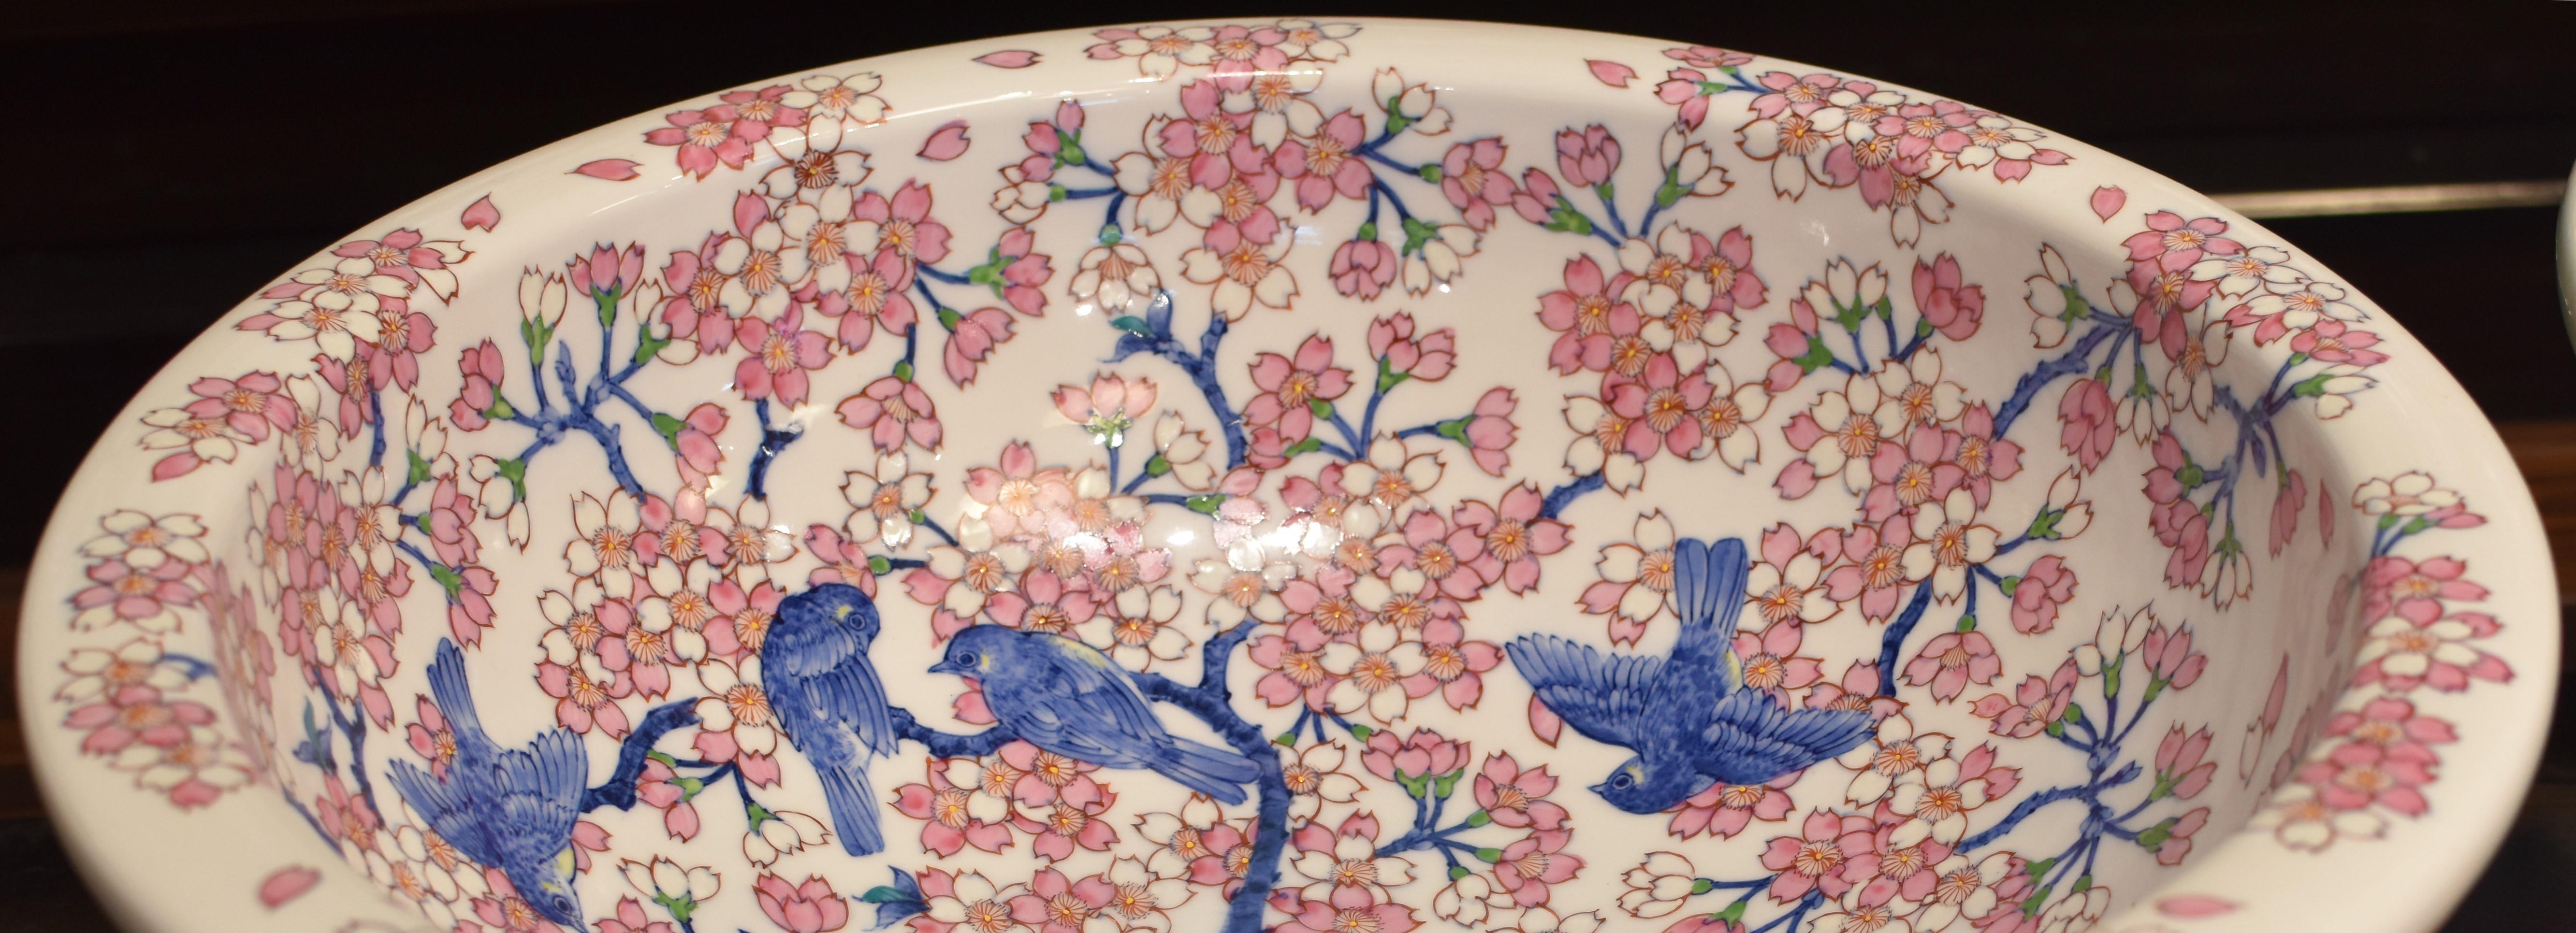 Hand-Painted Japanese Contemporary Porcelain Washbasin by Master Artist 1